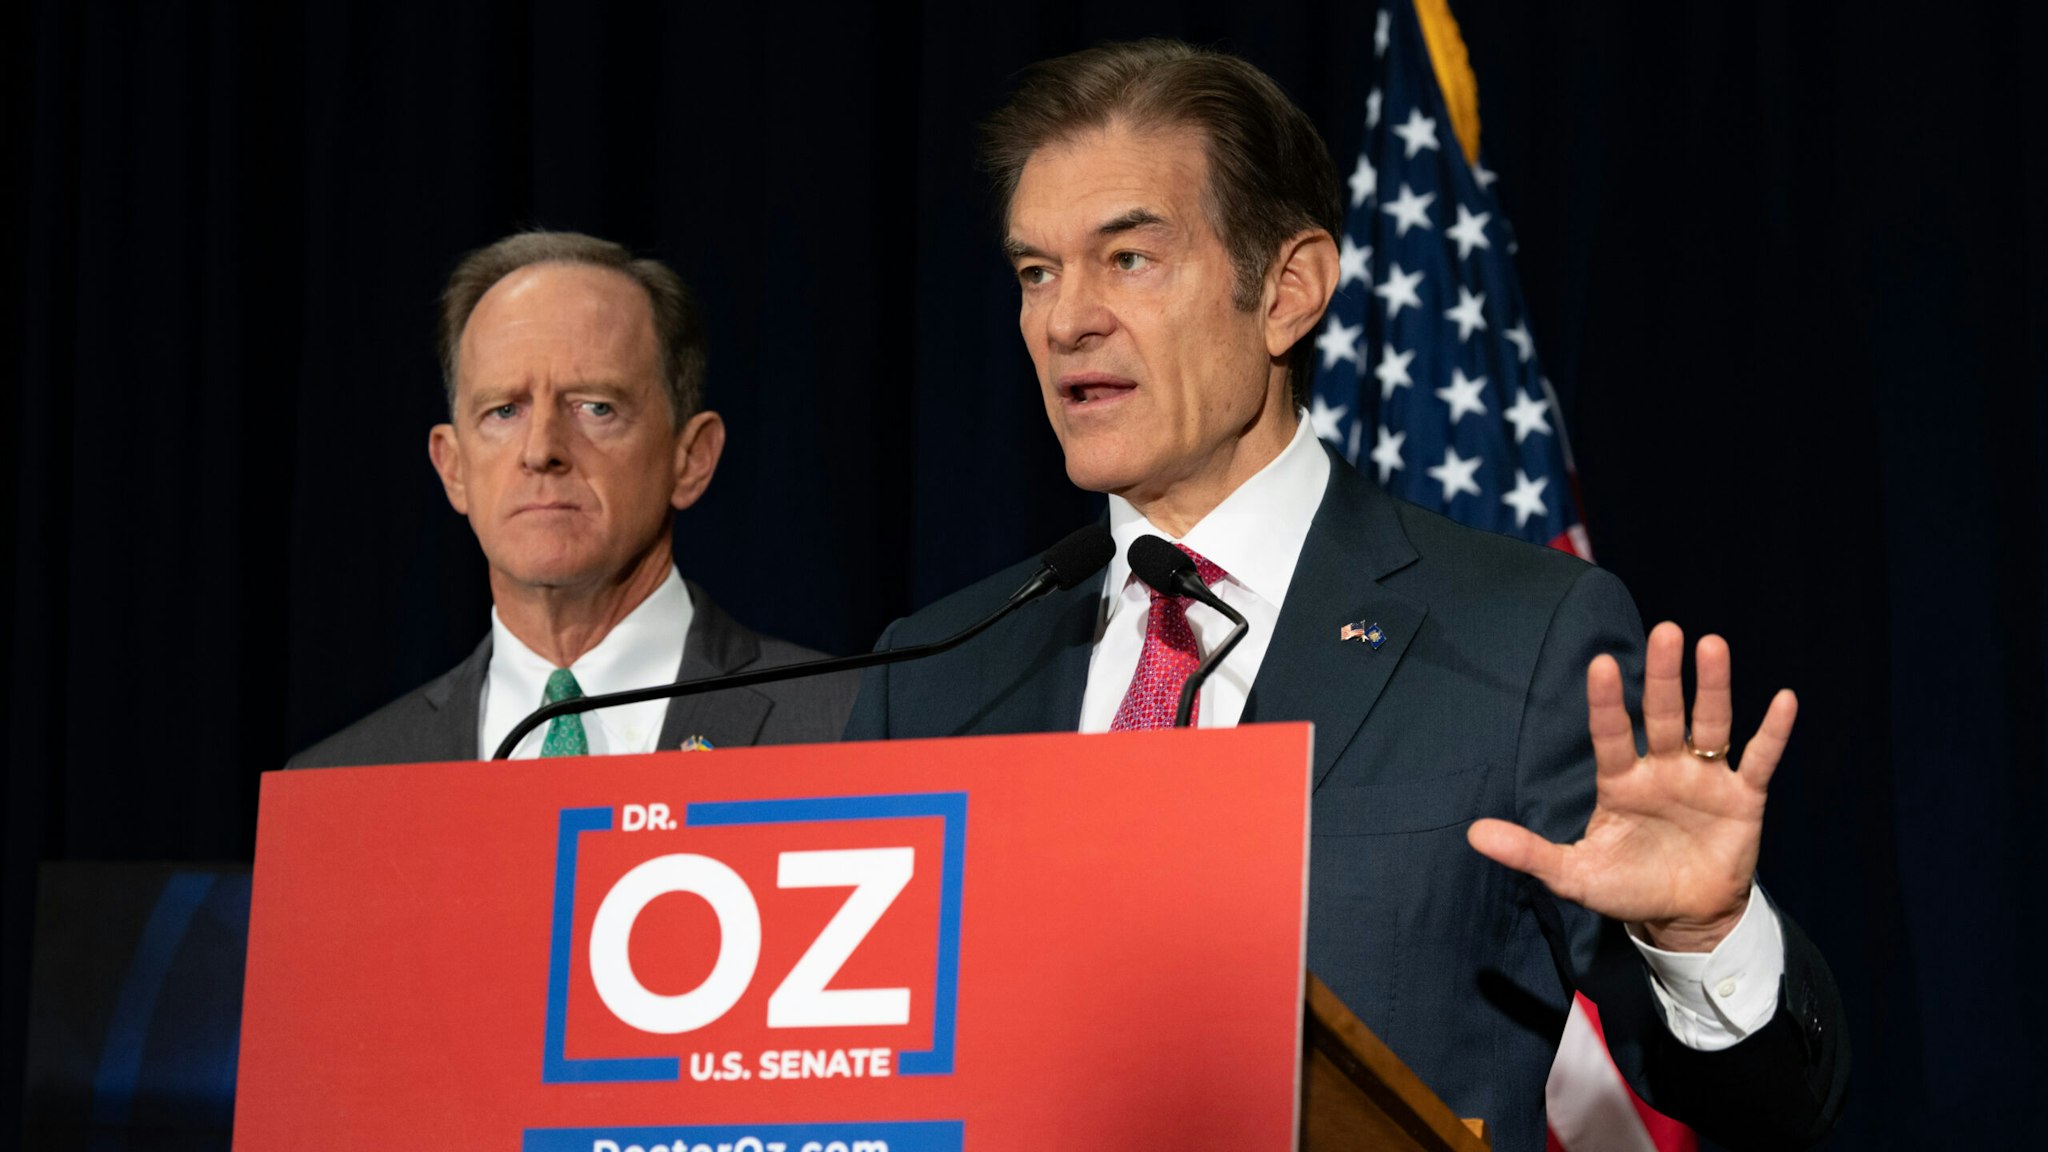 Mehmet Oz, US Republican Senate candidate for Pennsylvania, right, during a news conference with Senator Pat Toomey, a Republican from Pennsylvania, in Philadelphia, Pennsylvania, US, on Tuesday, Sept. 6, 2022.